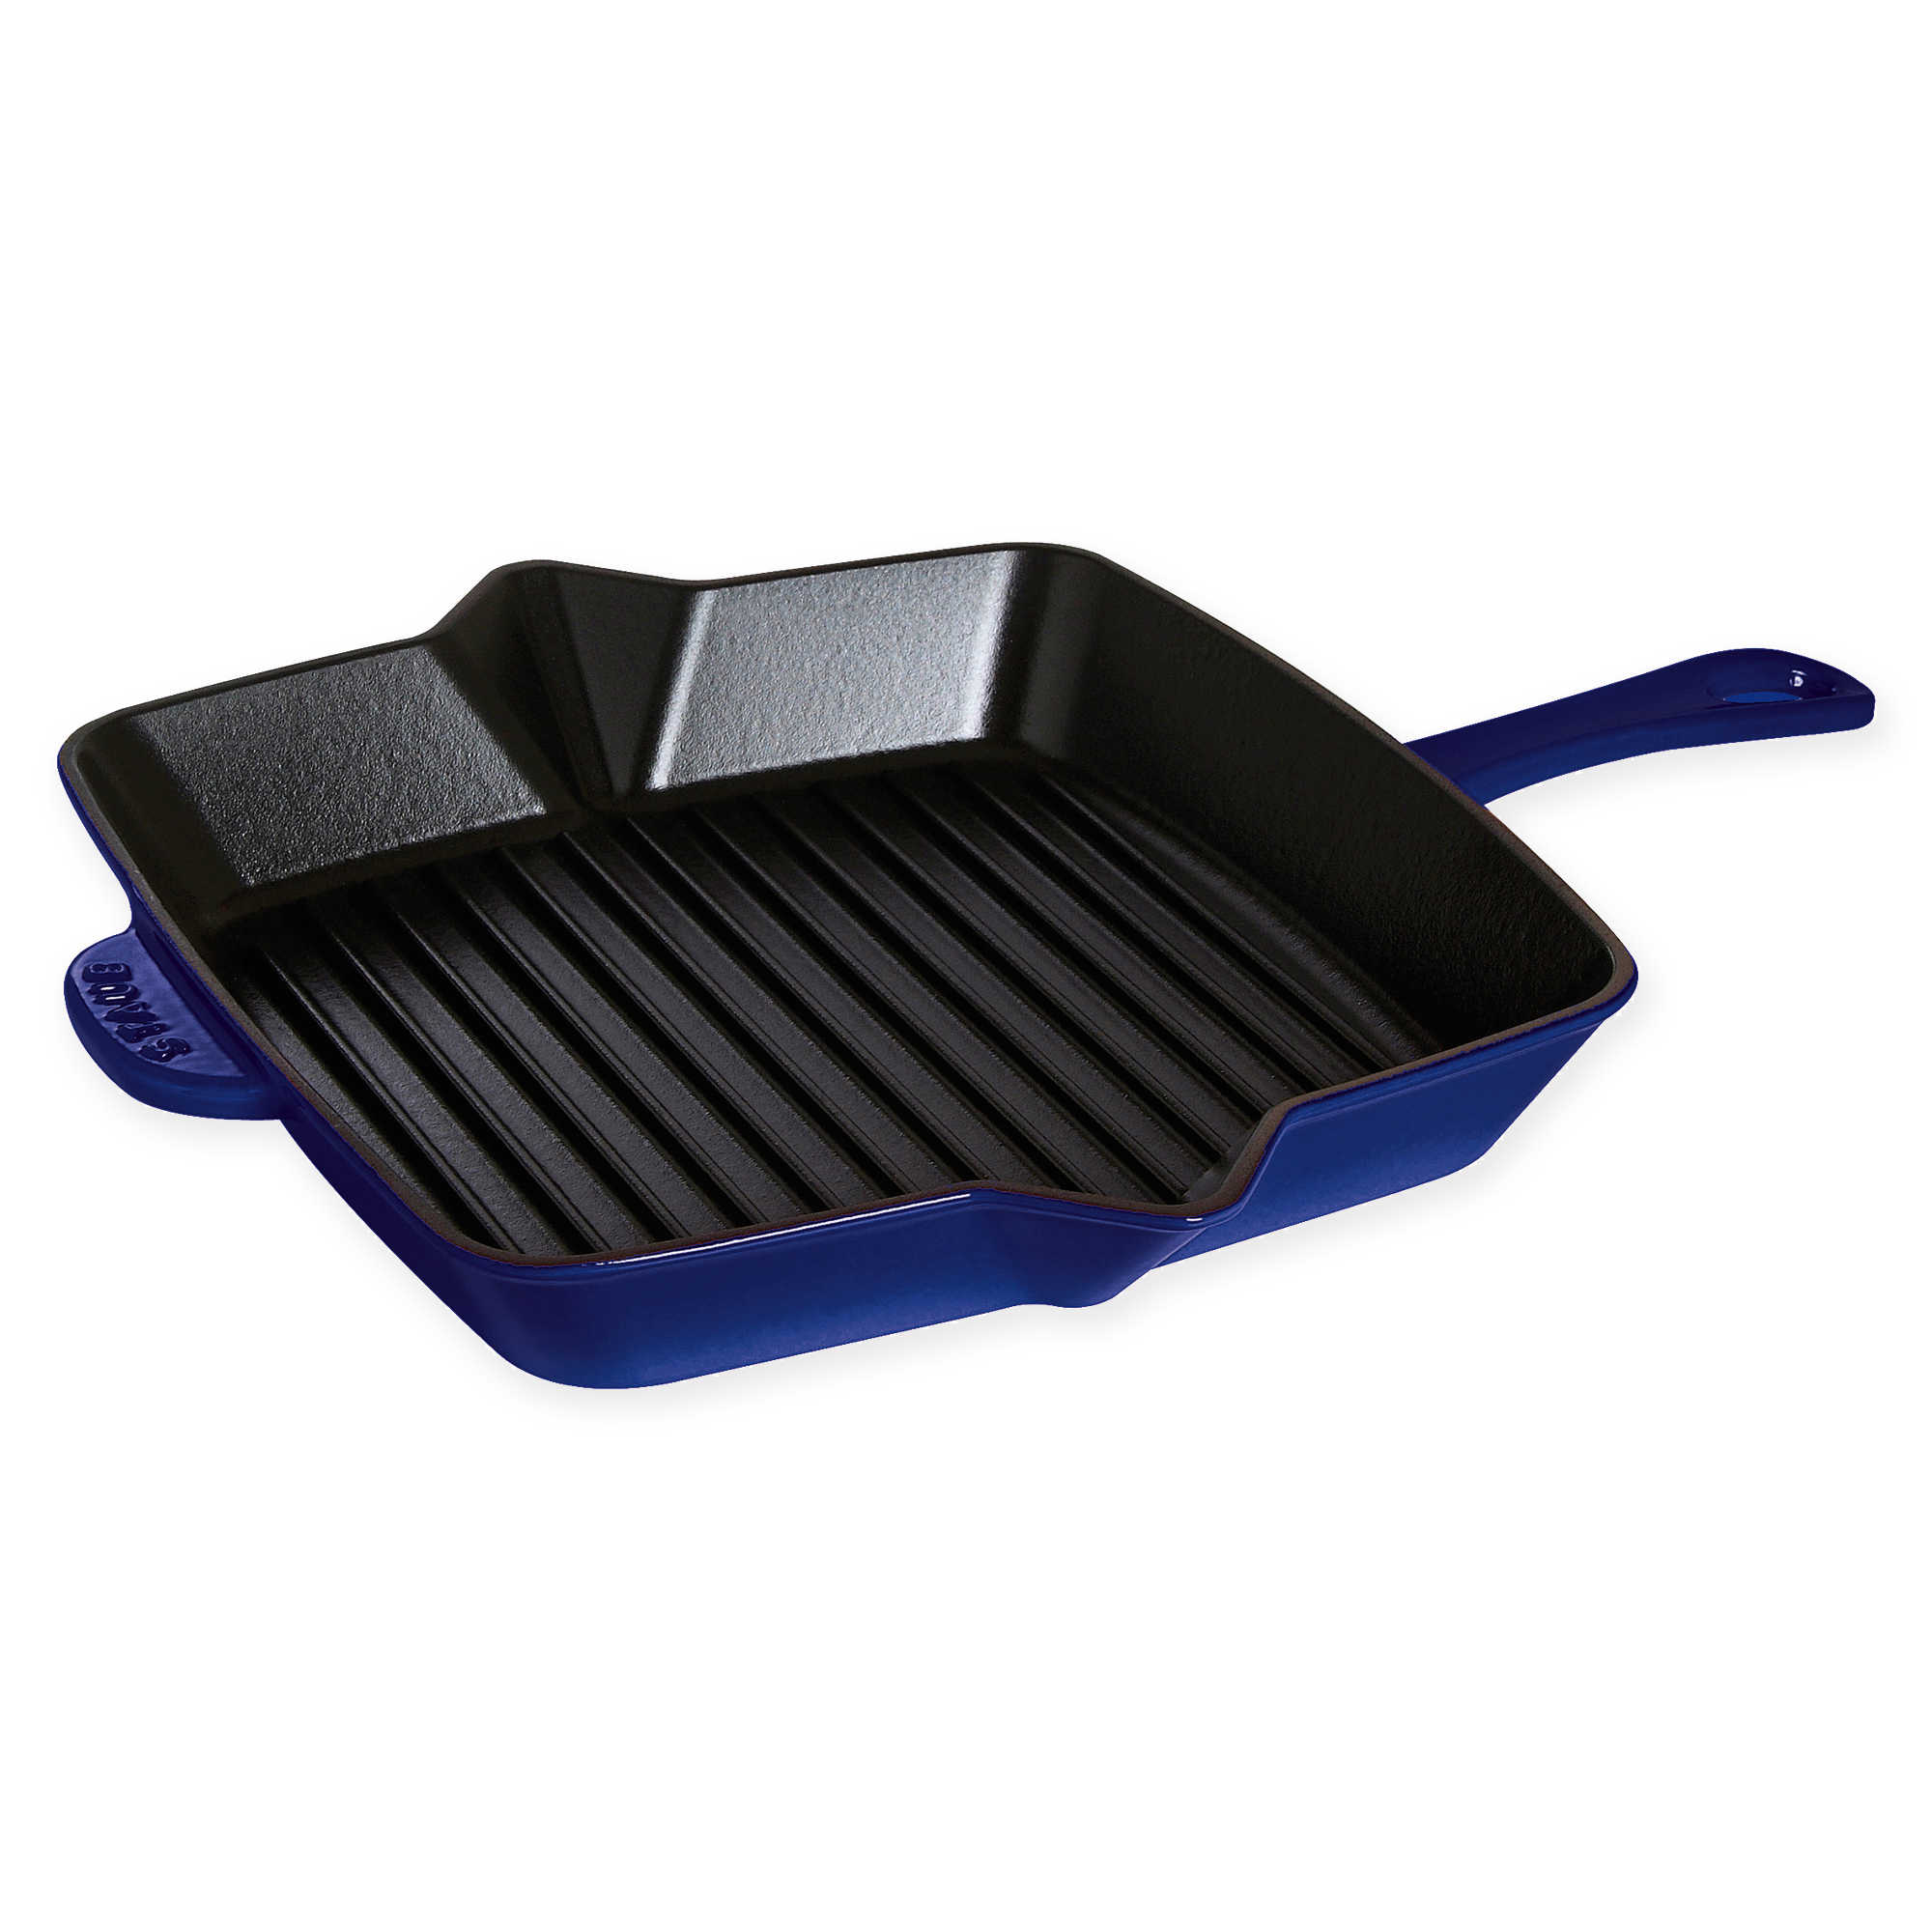 Valor 10 x 10 Galaxy Blue Square Enameled Cast Iron Grill Pan